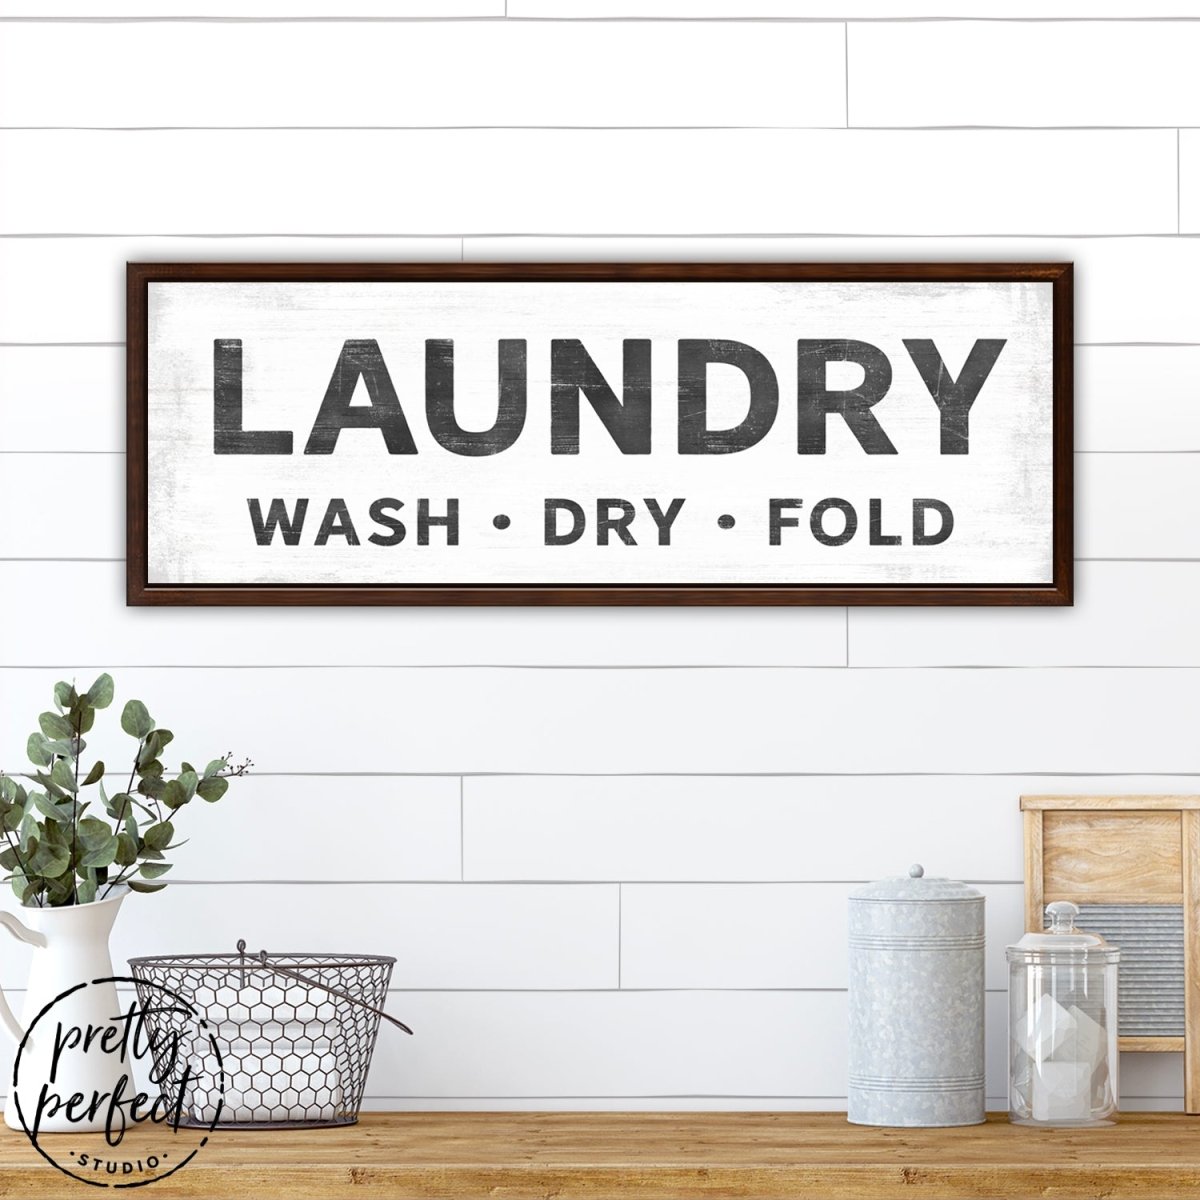 Laundry Sign Above Organizer - Wash, Dry, and Fold - Pretty Perfect Studio